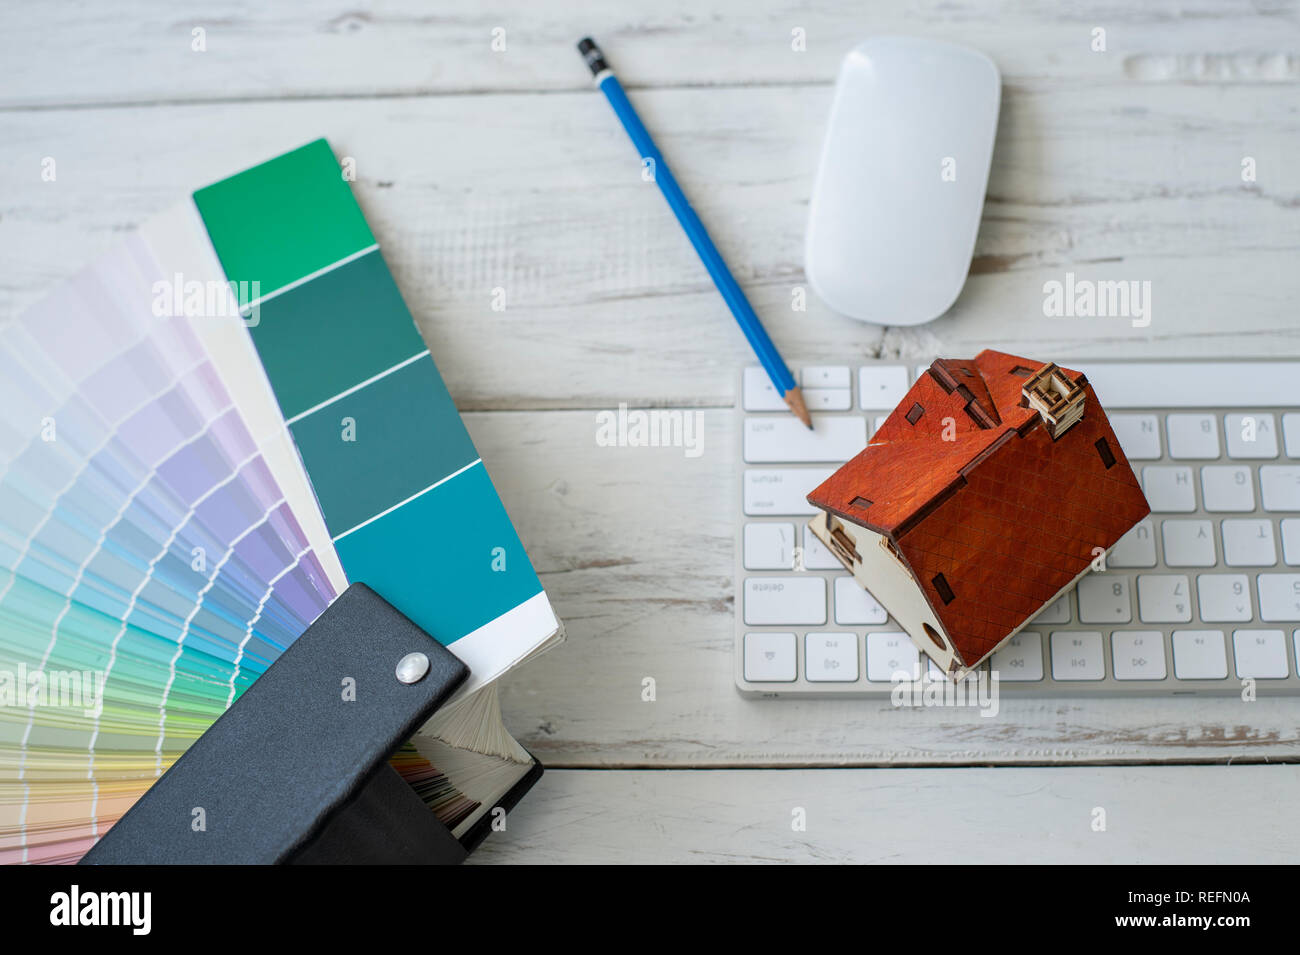 Top view of Architect & Interior designer working table with color palette/ home renovation concept - Image Stock Photo